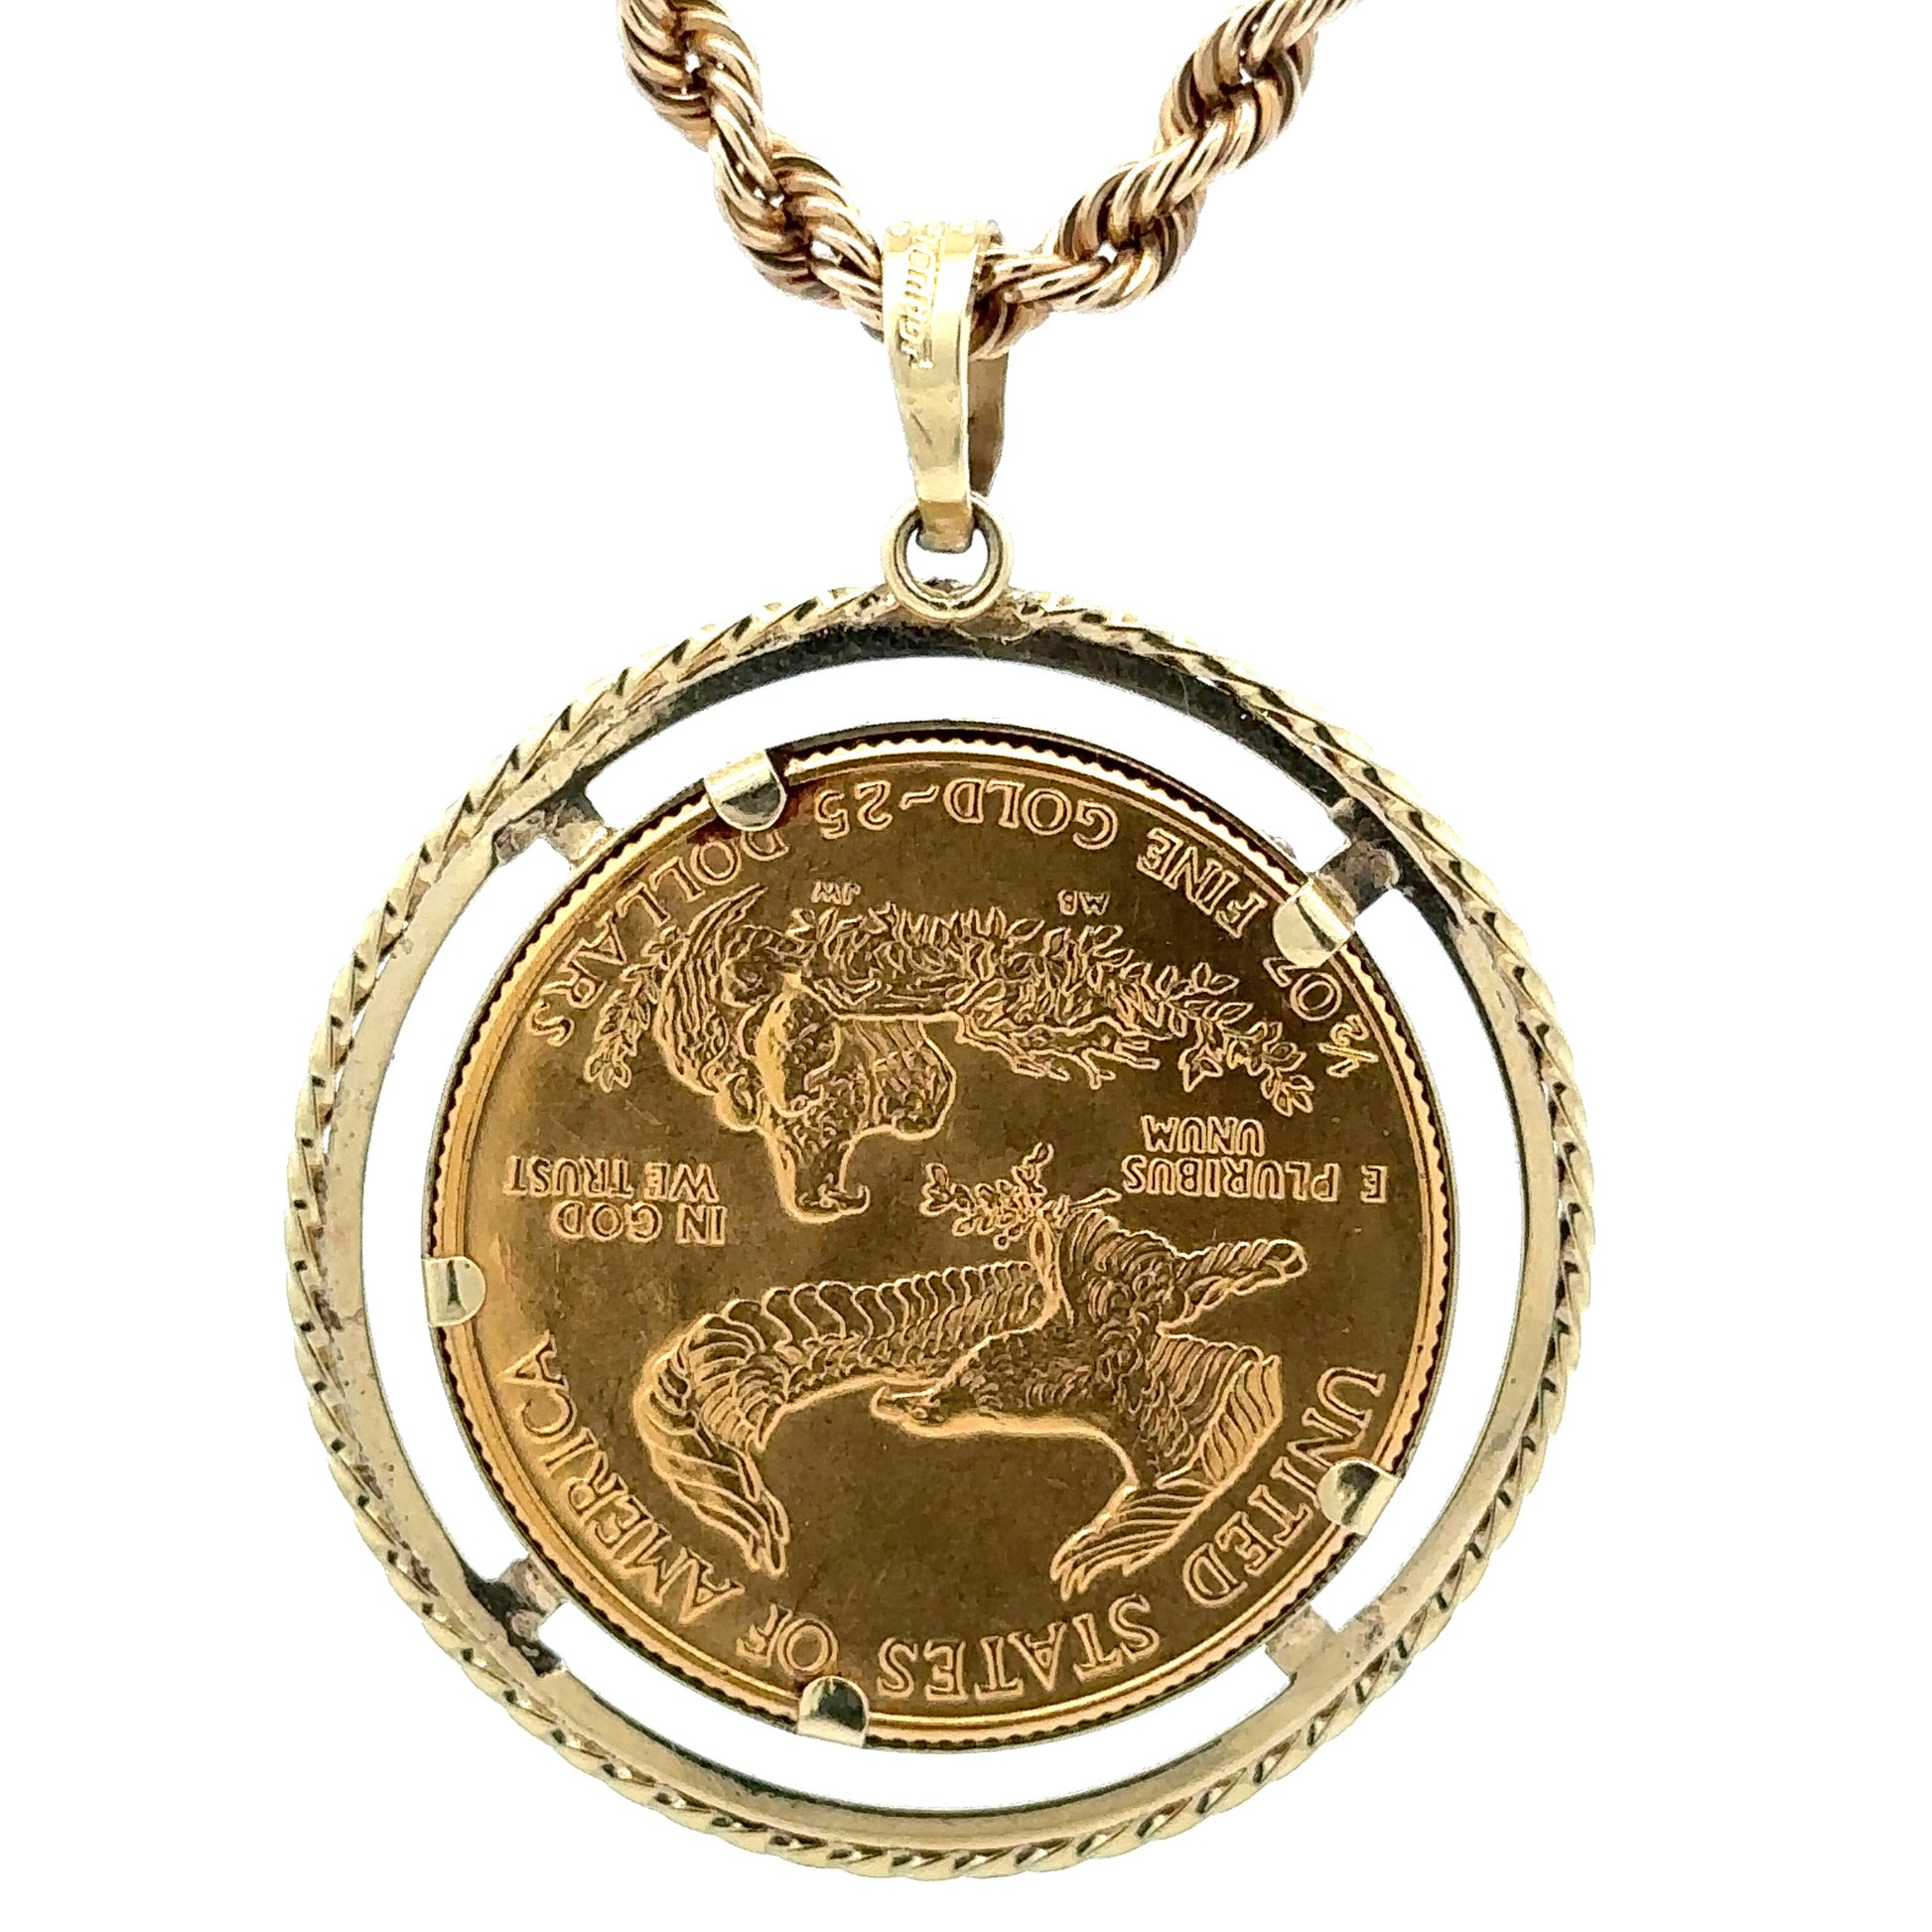 back of coin pendant. The coin is upside down for the back